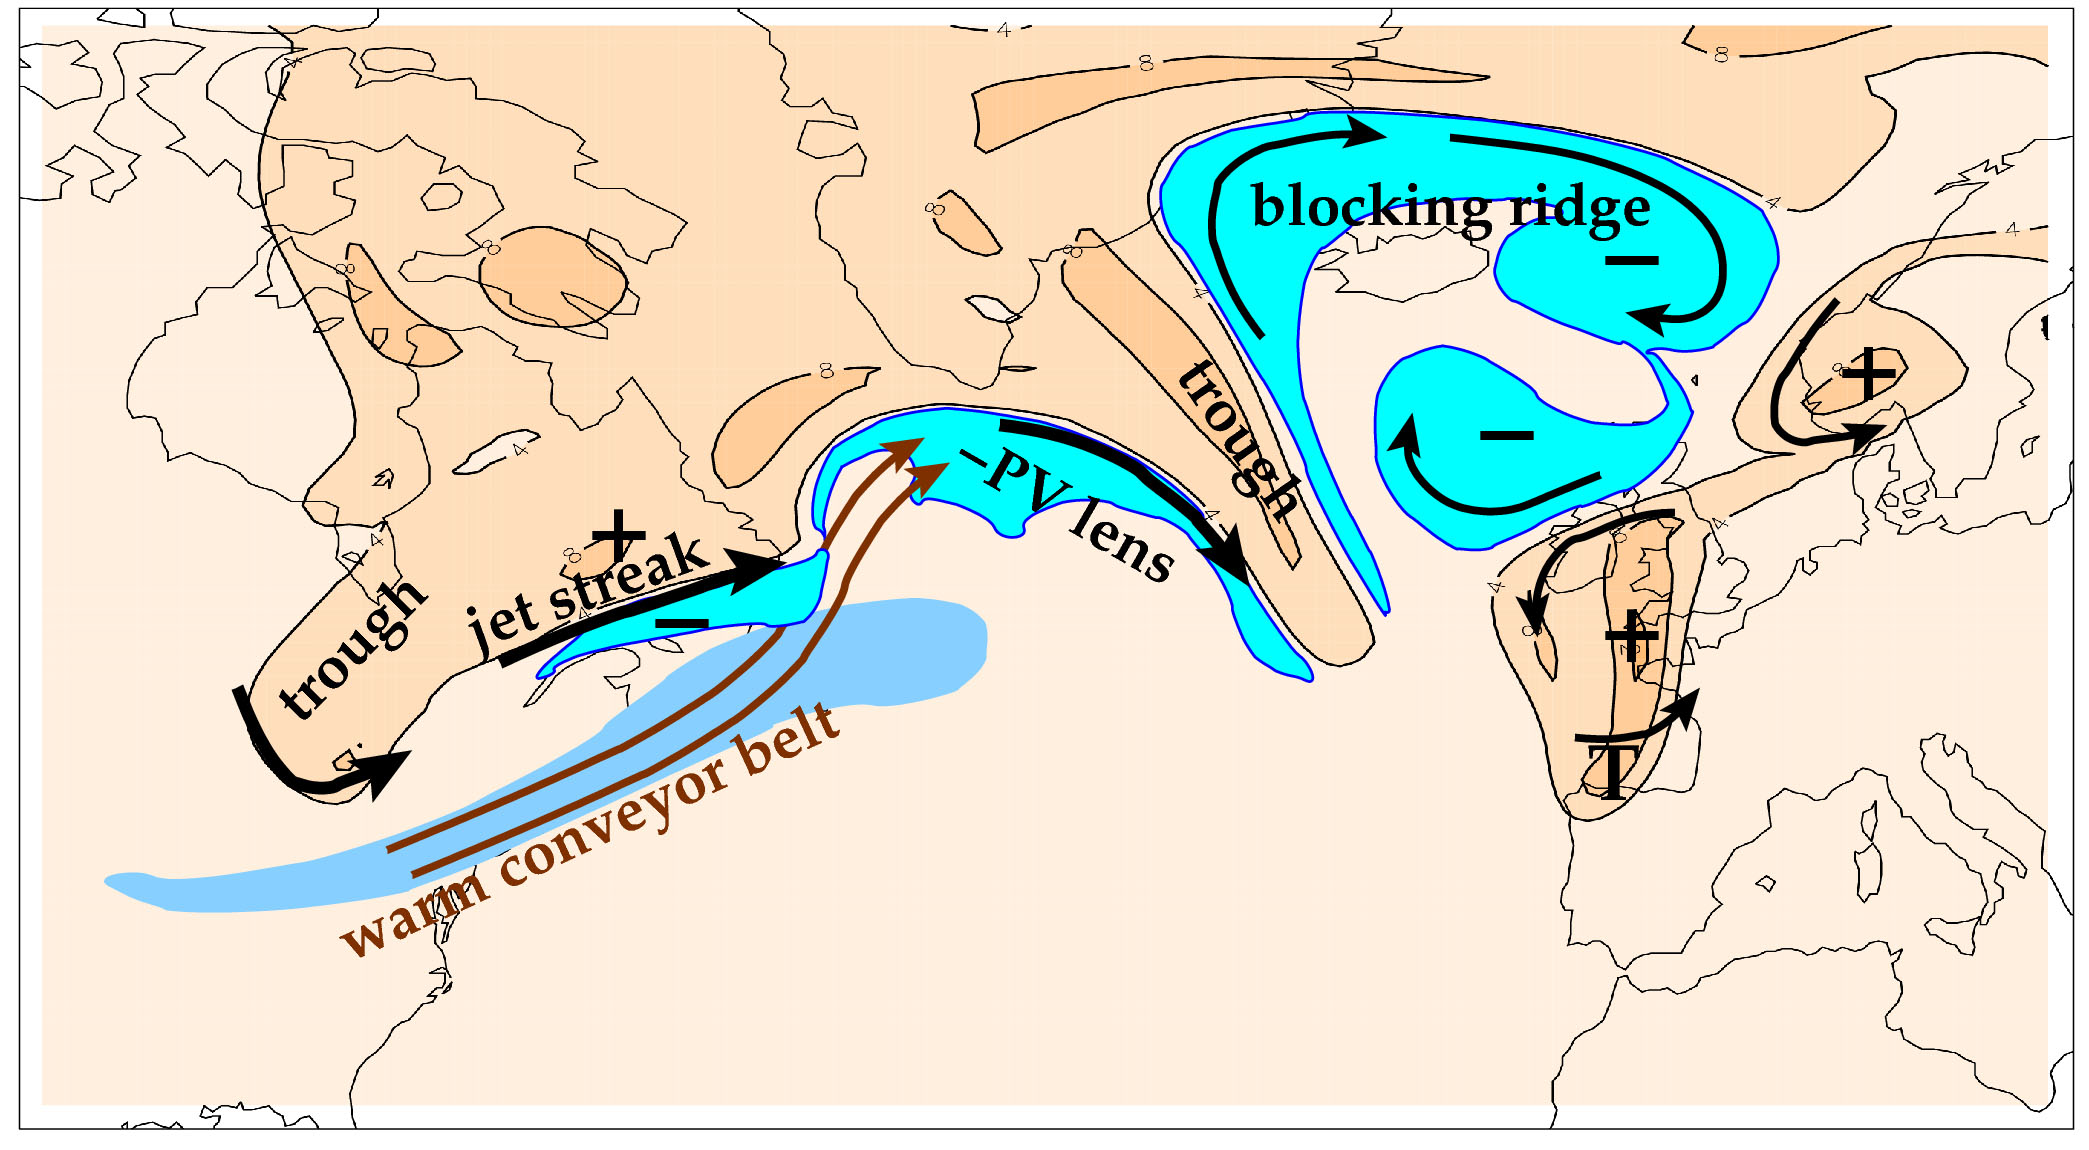 Illustration of phenomena on the jet stream related to downstream propagation of wave activity and high impact weather (Image credit: John Methven).